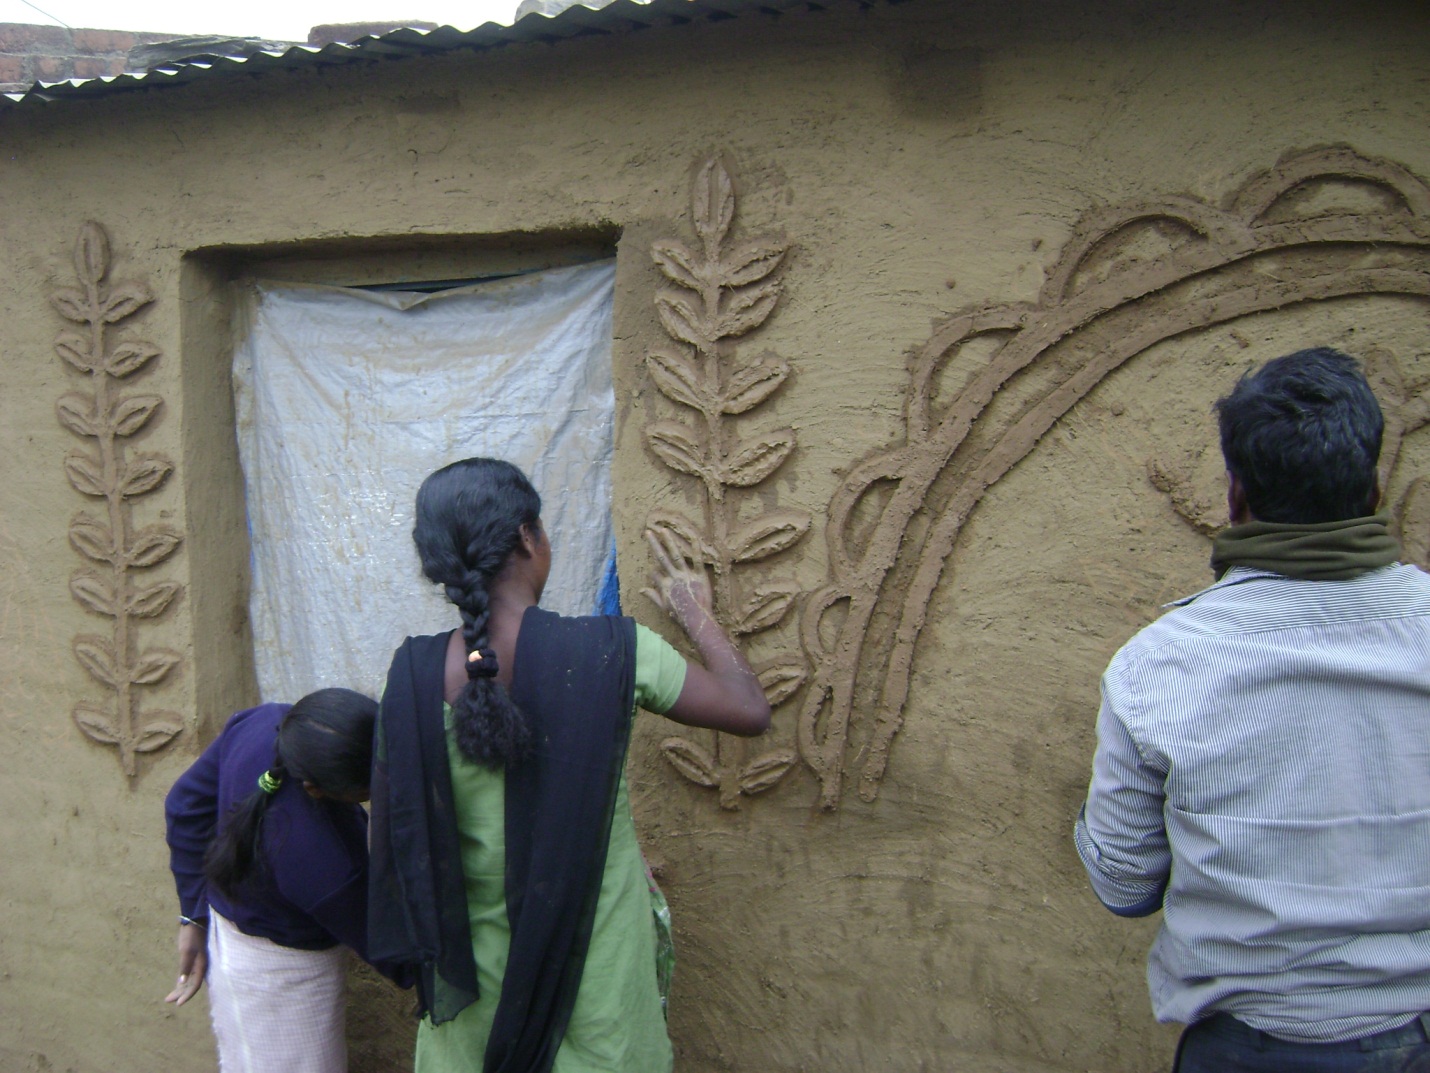 Display of art work on the walls of the community hall by the Santhals